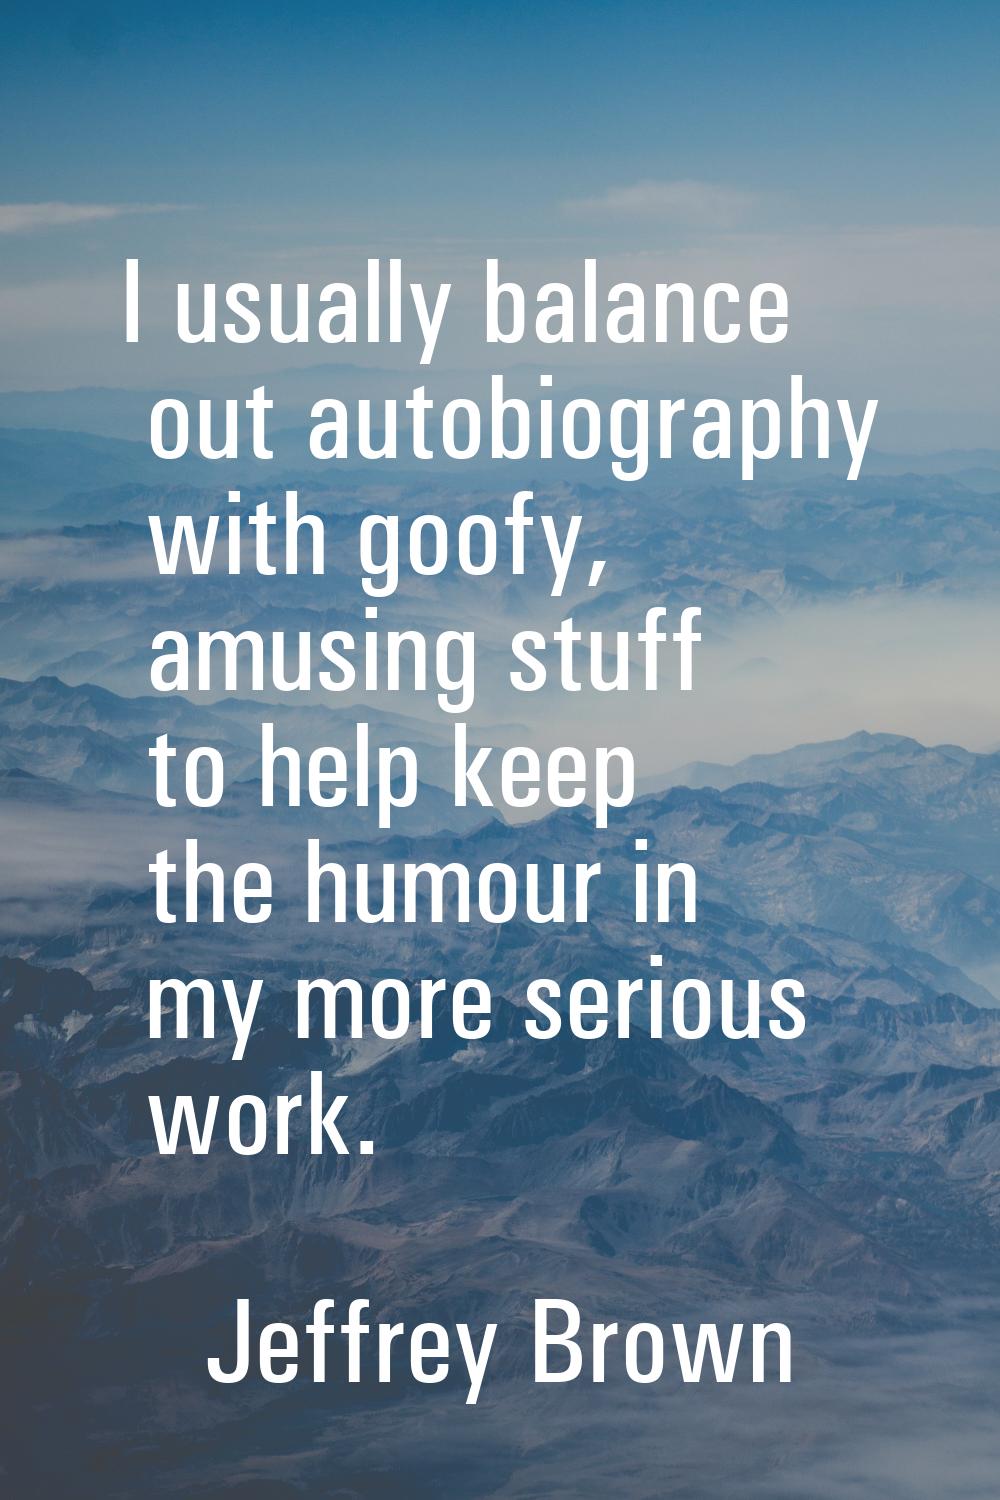 I usually balance out autobiography with goofy, amusing stuff to help keep the humour in my more se